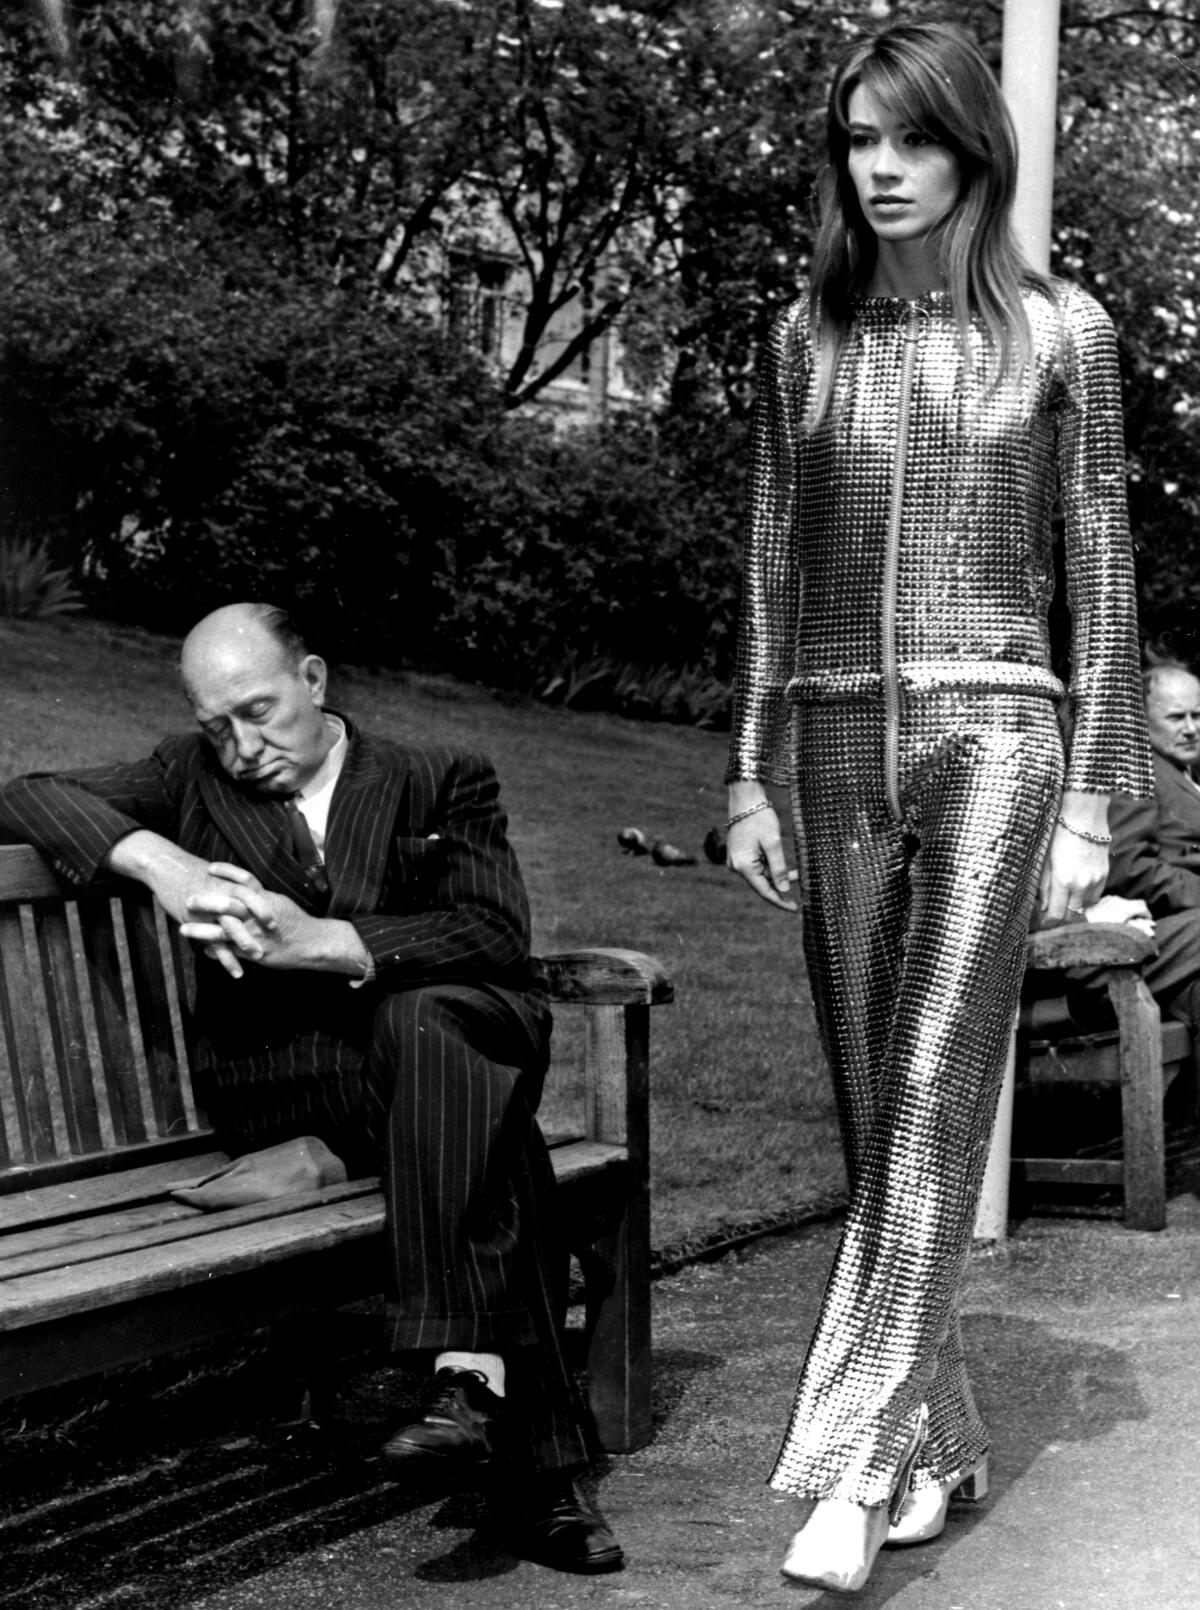 Françoise Hardy walks past a middle-aged man dressed in a suit and pretending to sleep on a park bench. 